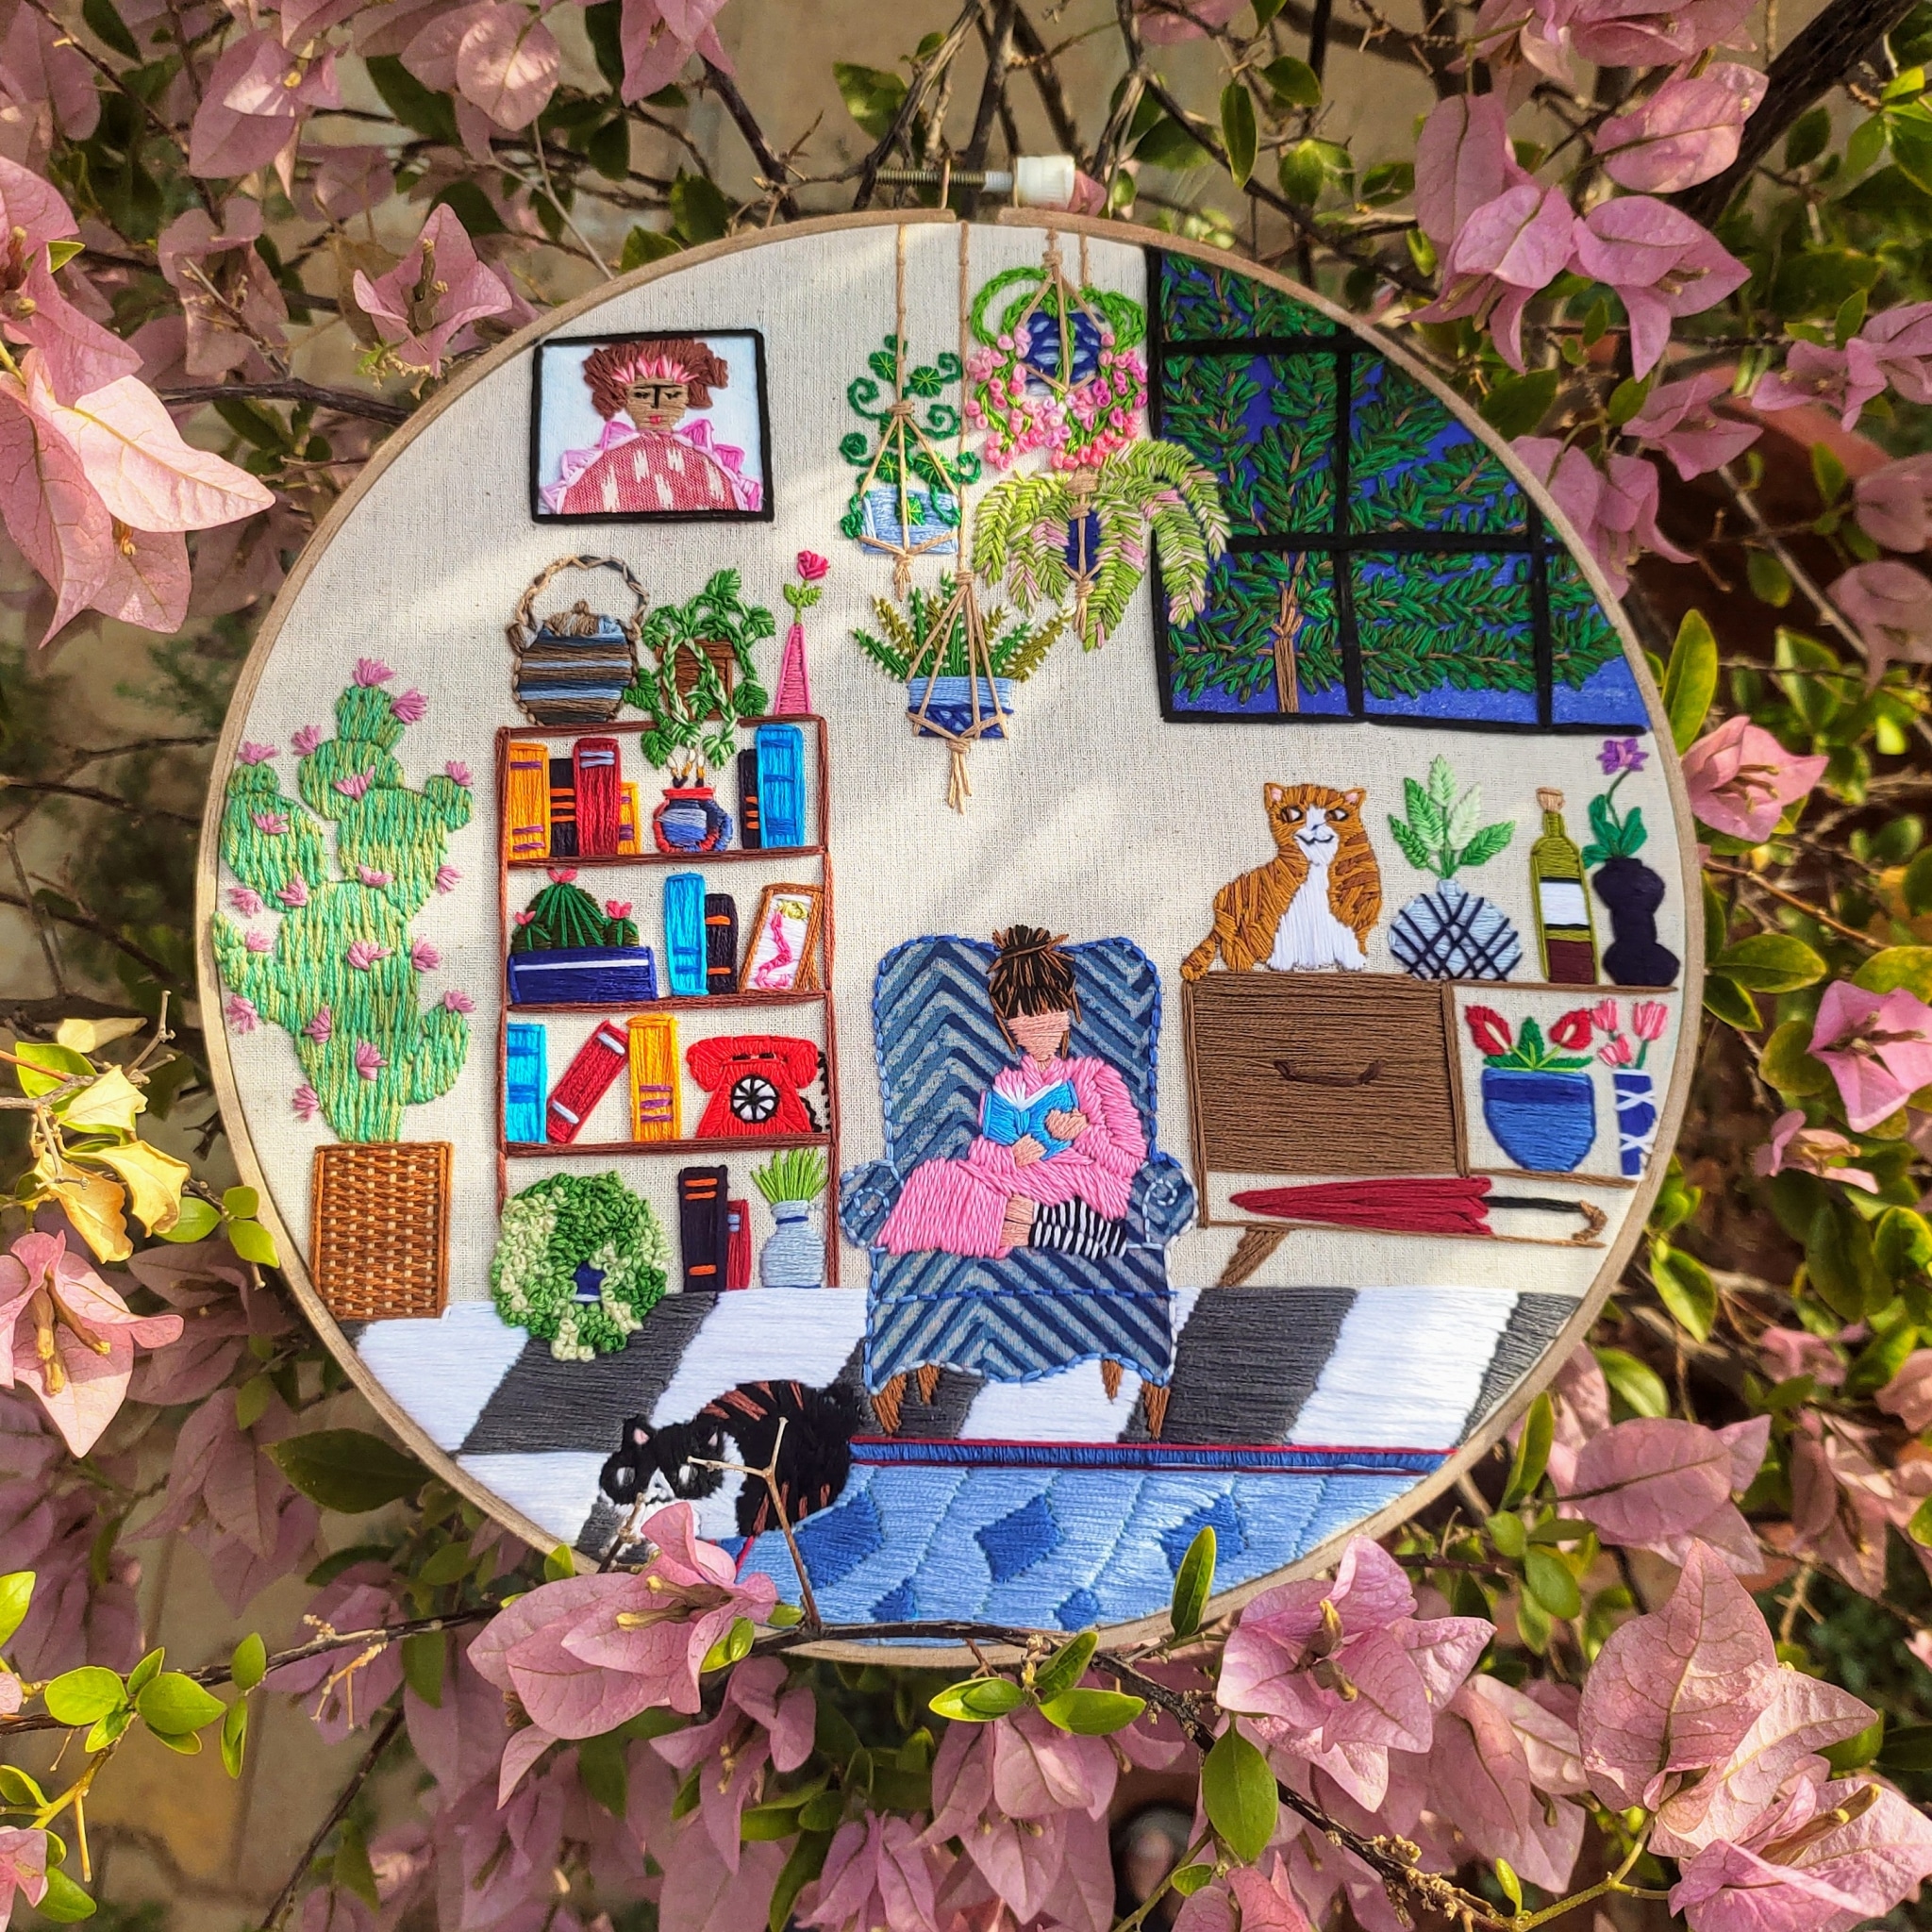 Embroidery Art of Daily Life by Anuradha Bhaumick